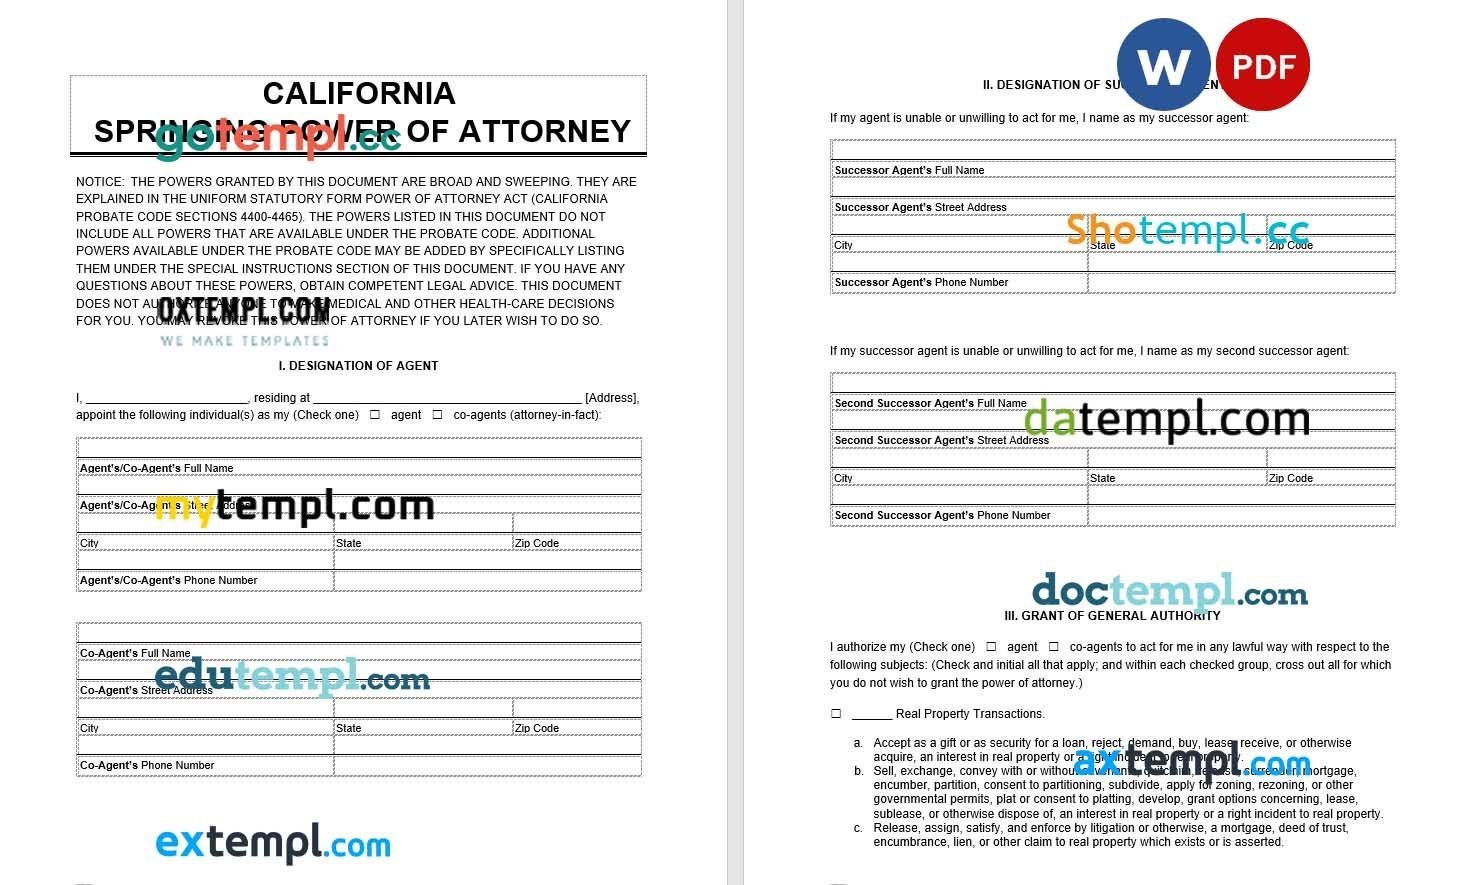 California Springing Power of Attorney example, fully editable